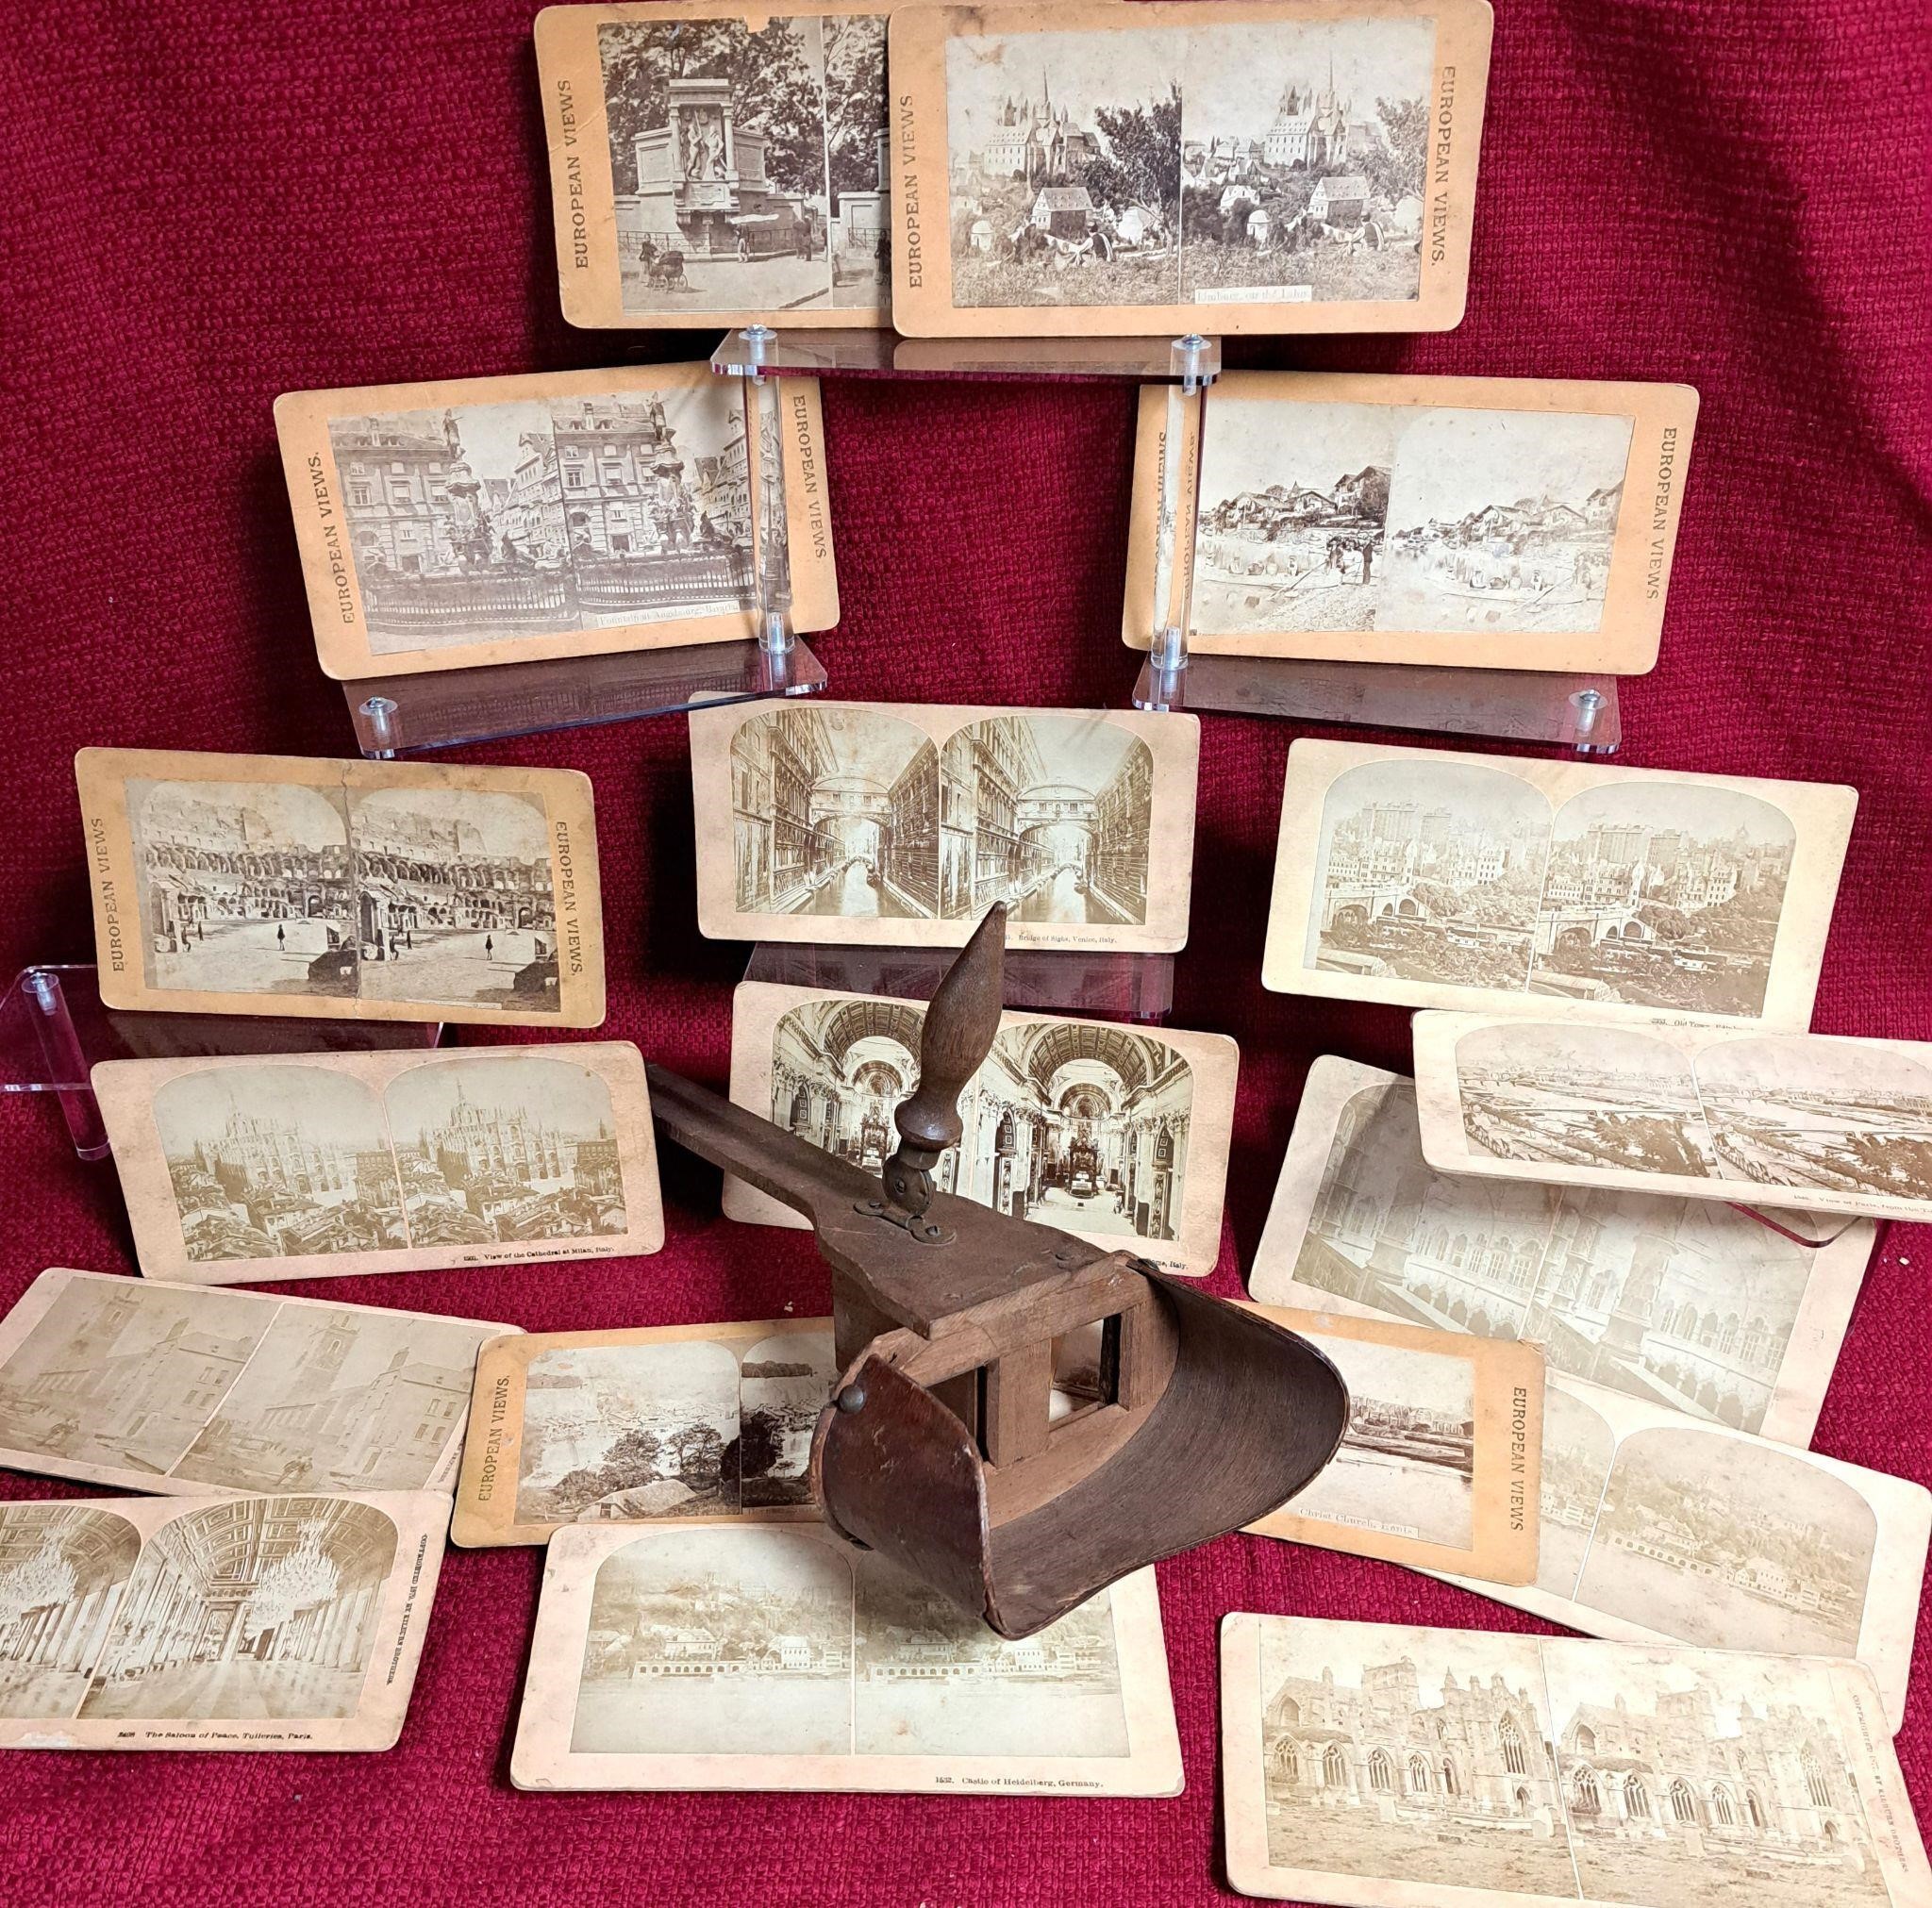 ANTIQUE STEREOSCOPE READER & STEREOVIEW CARDS